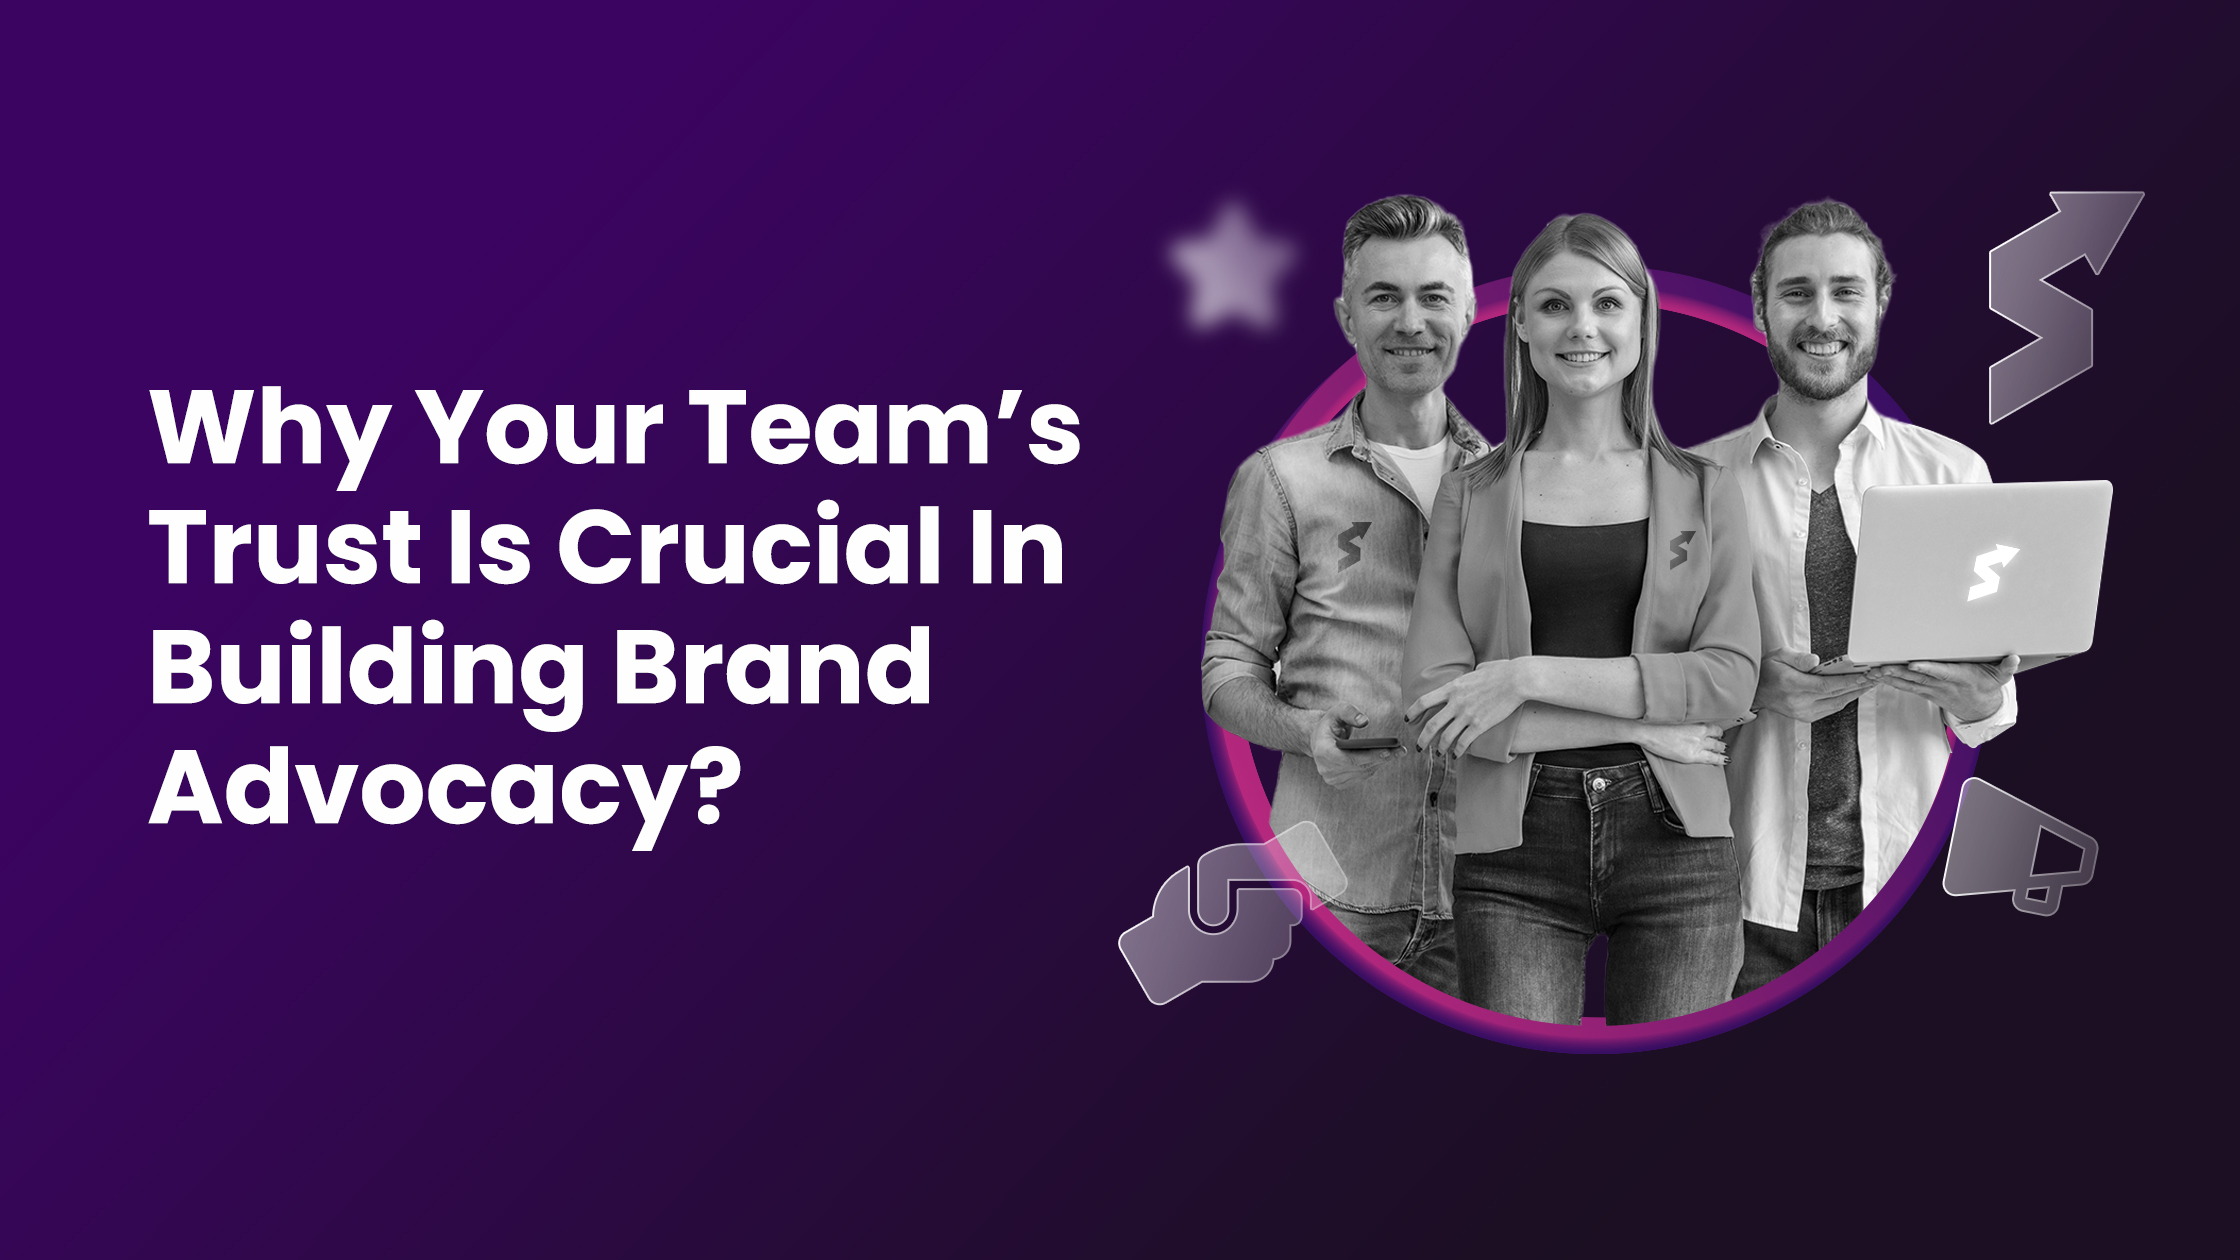 Why Your Team’s Trust Is Crucial In Building Brand Advocacy?